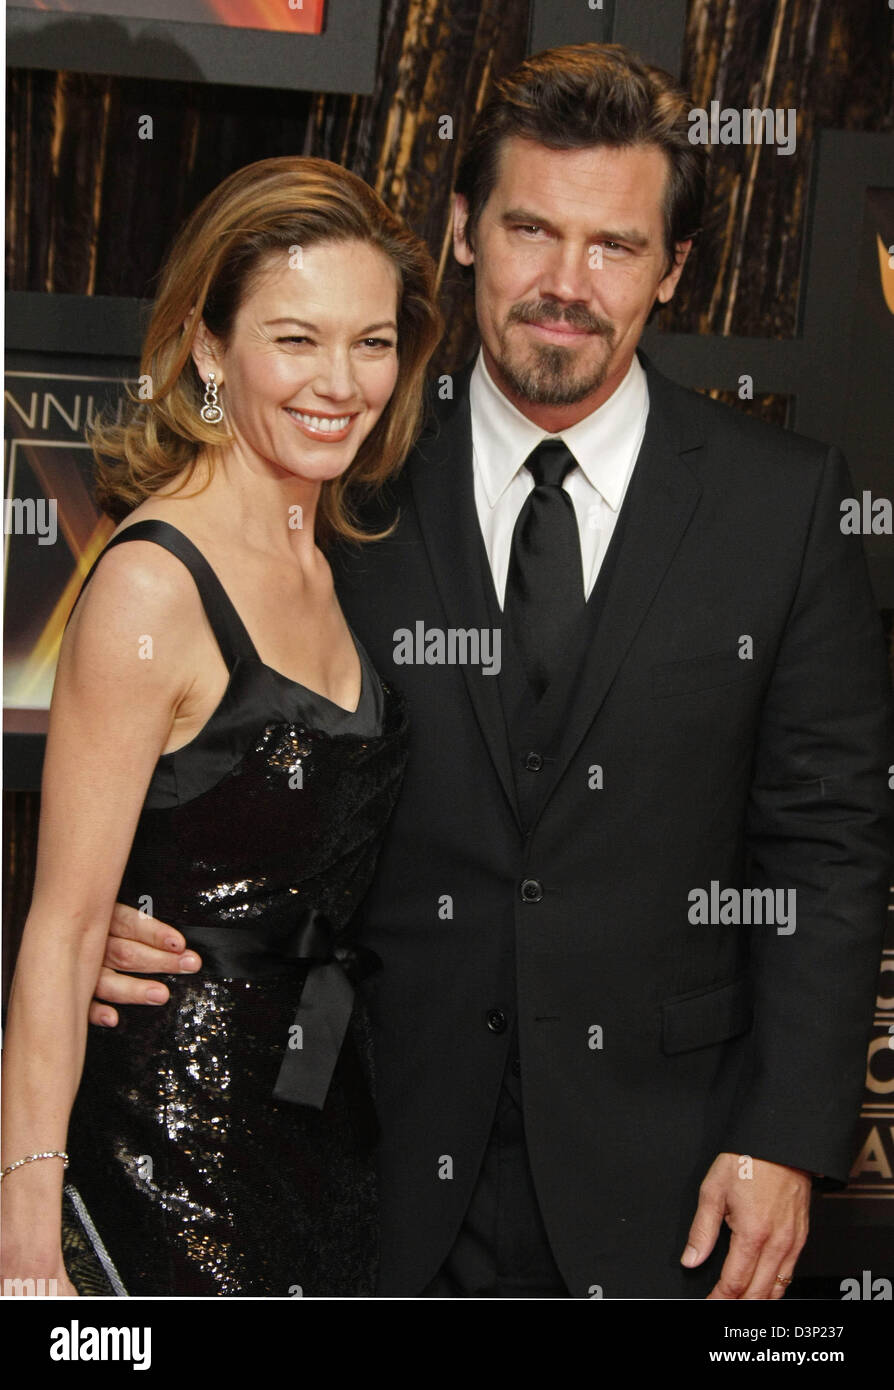 Actress Diane Lane and her husband Josh Brolin arrive for the 14th Annual  Critics? Choice Awards in Santa Monica, California, United States of  America, 08 January 2009. The Critics? Choice Awards are